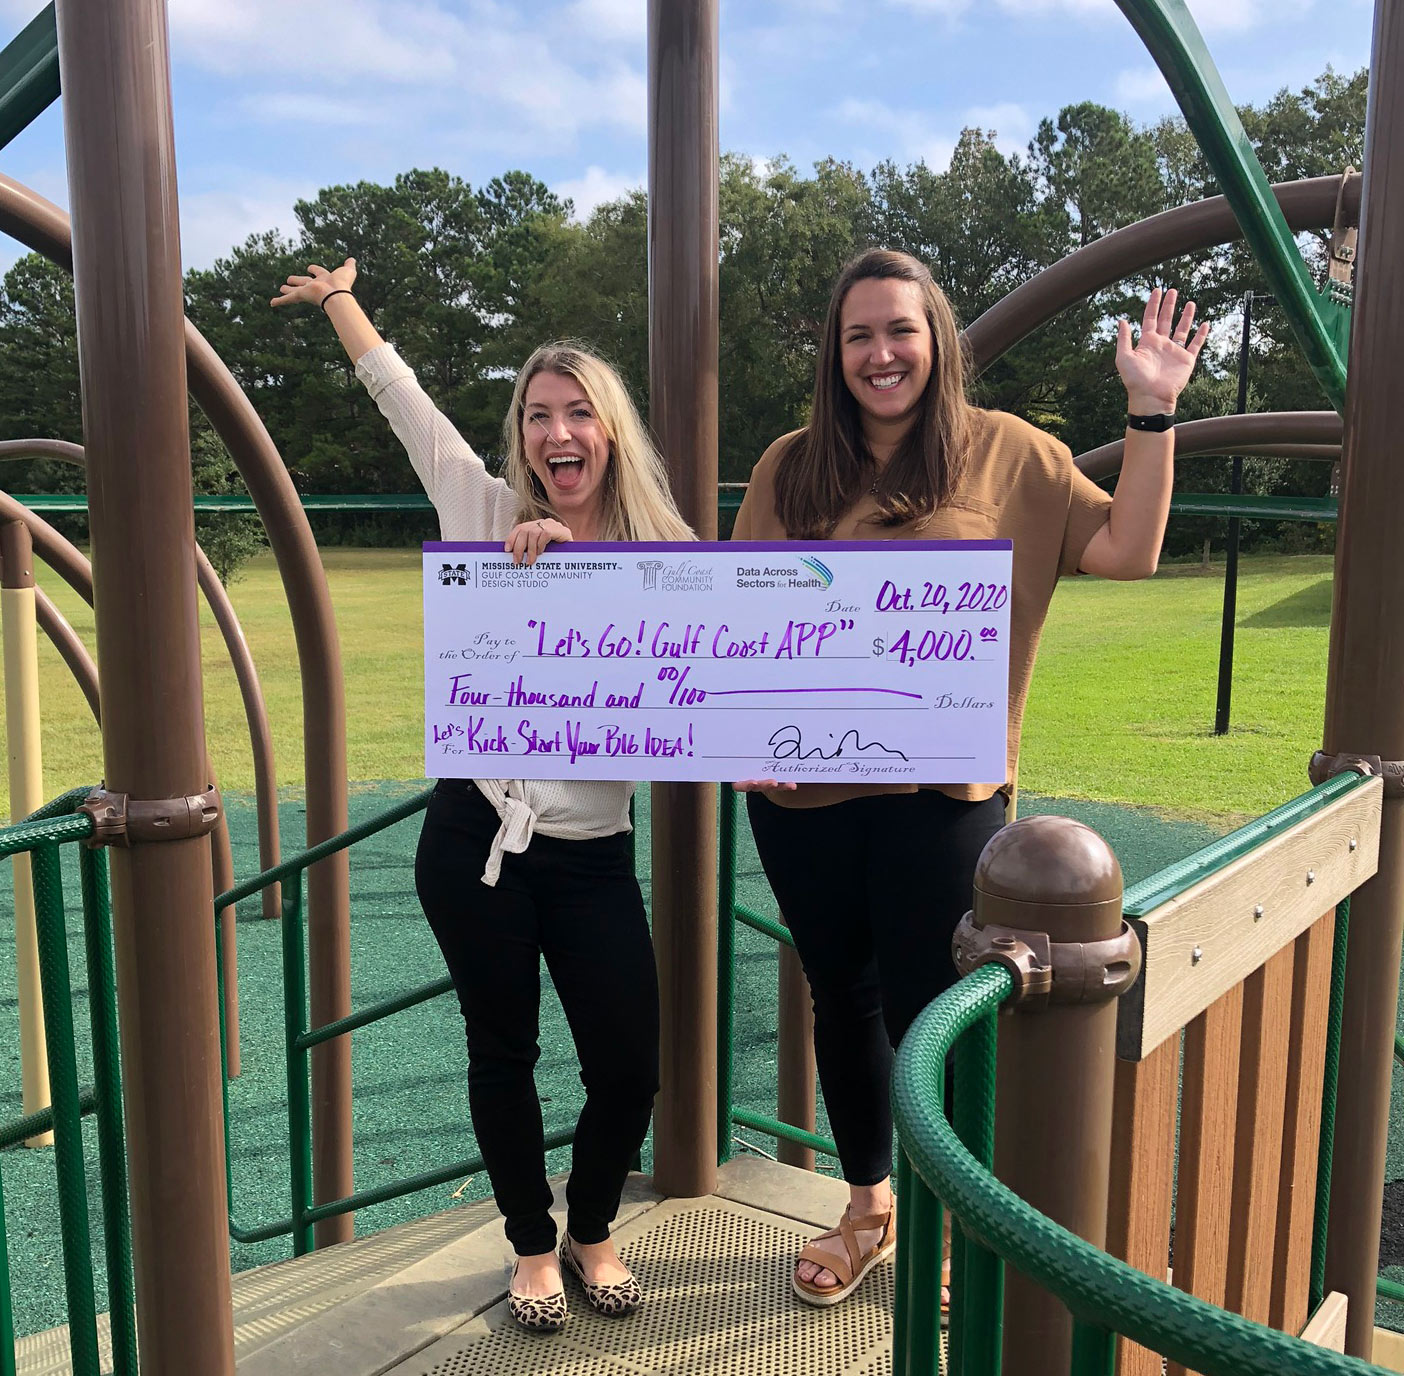 Cathryn Wineski and Kelsey Keel with Let’s Go! Gulf Coast hold giant check